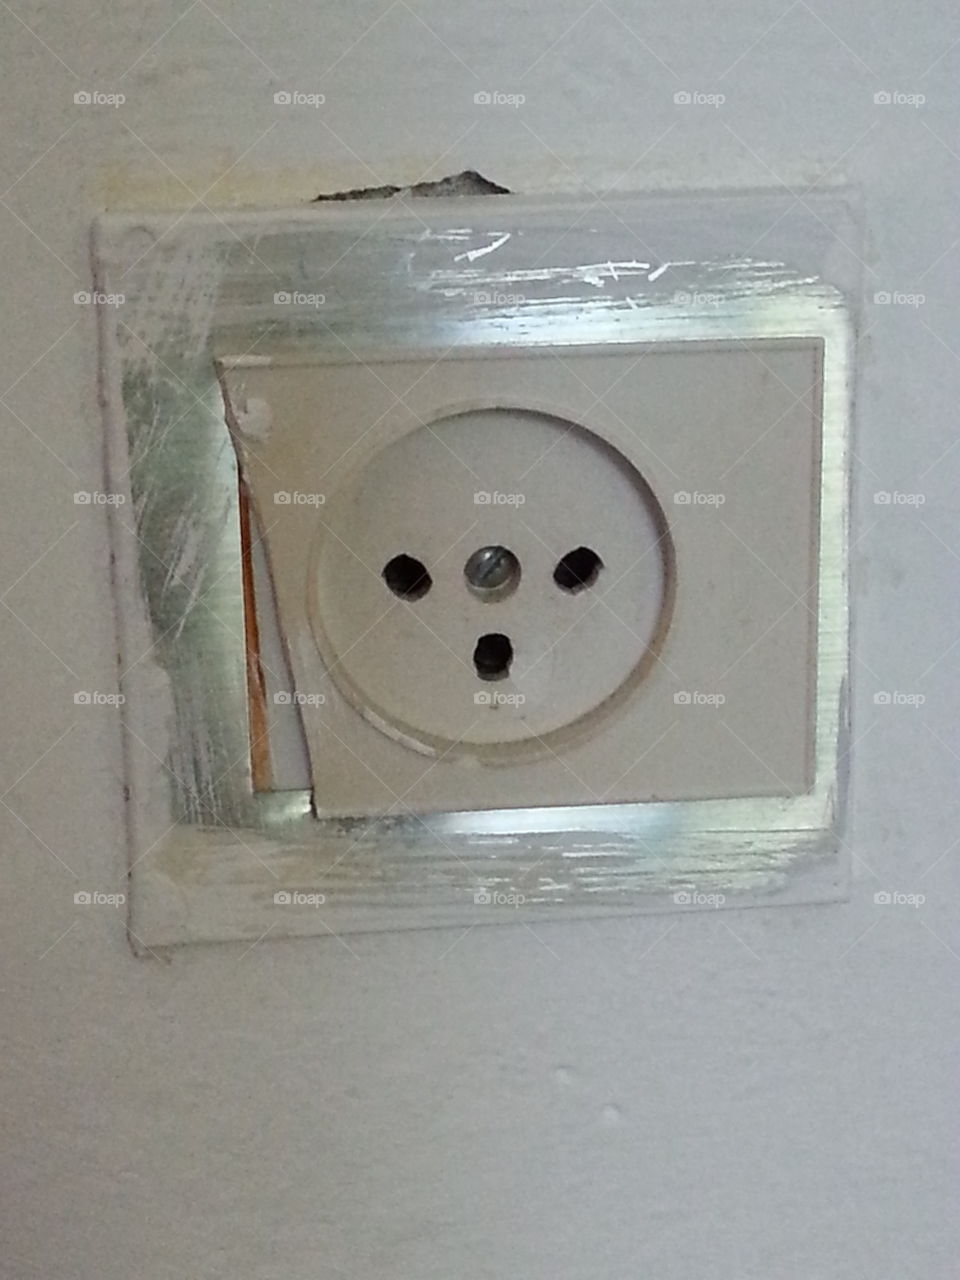 An Electrical Outlet